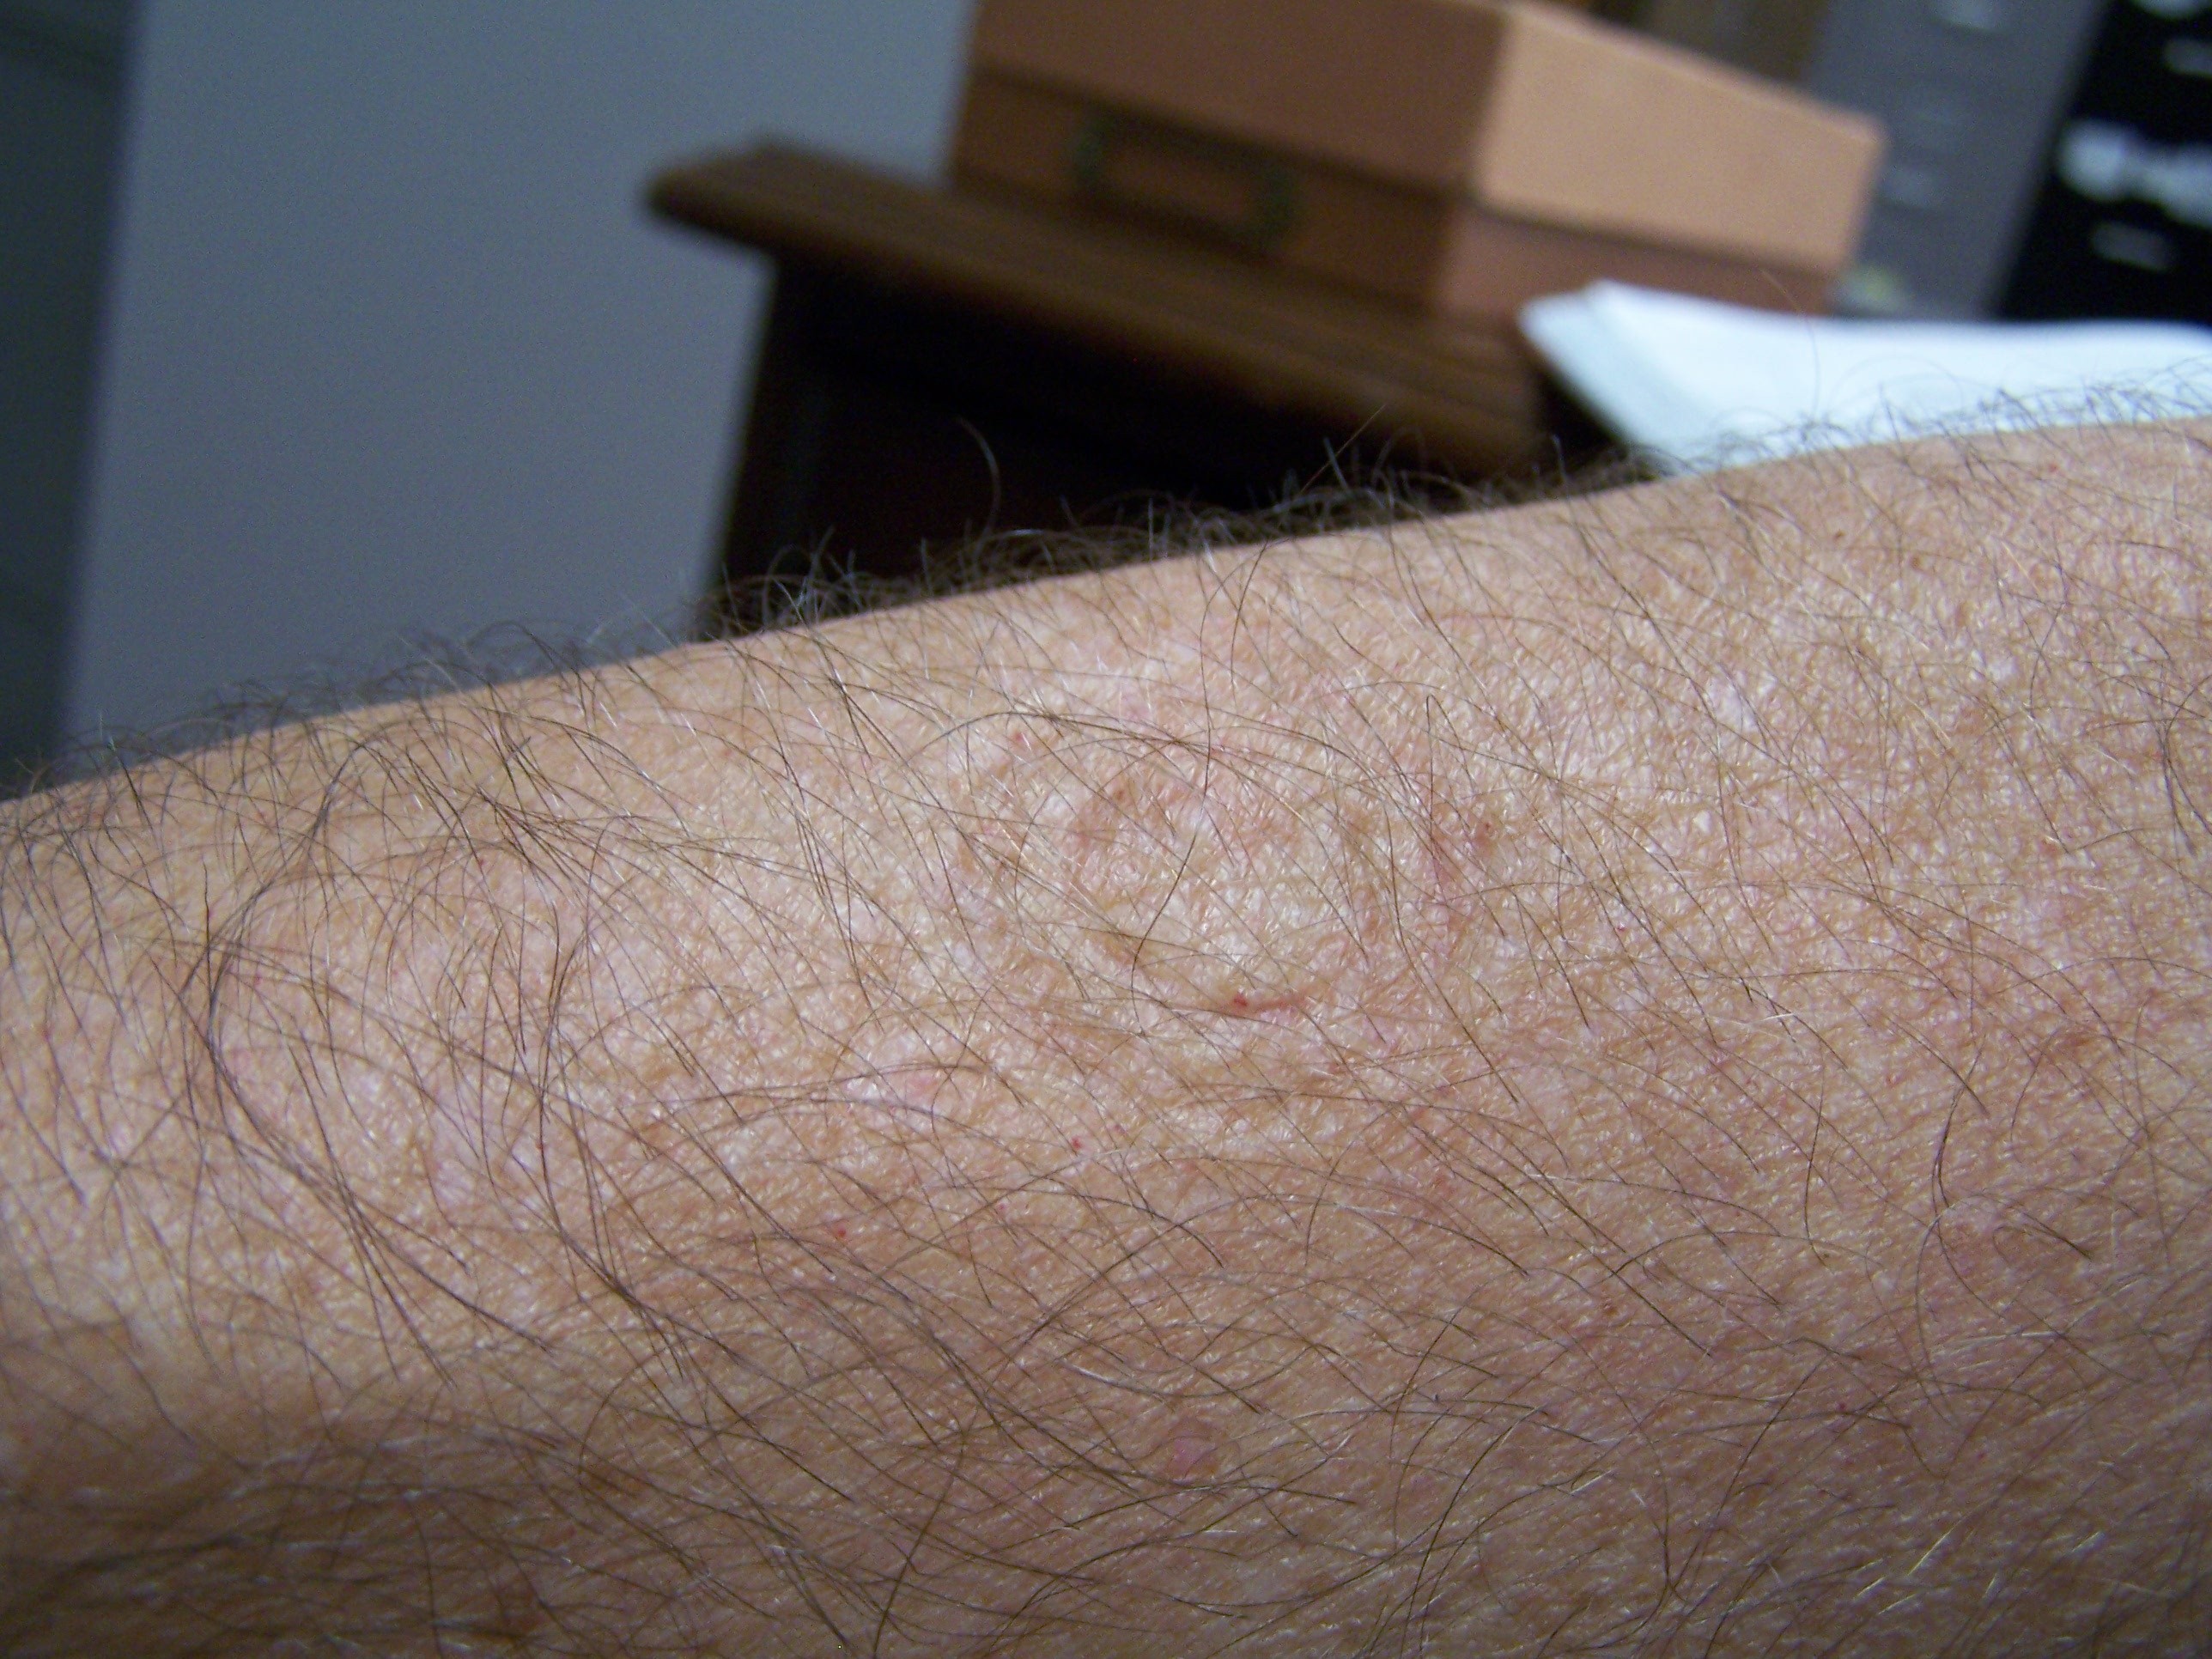 Figure 4. Bed bug feeding site on arm after feeding (rings are from ...